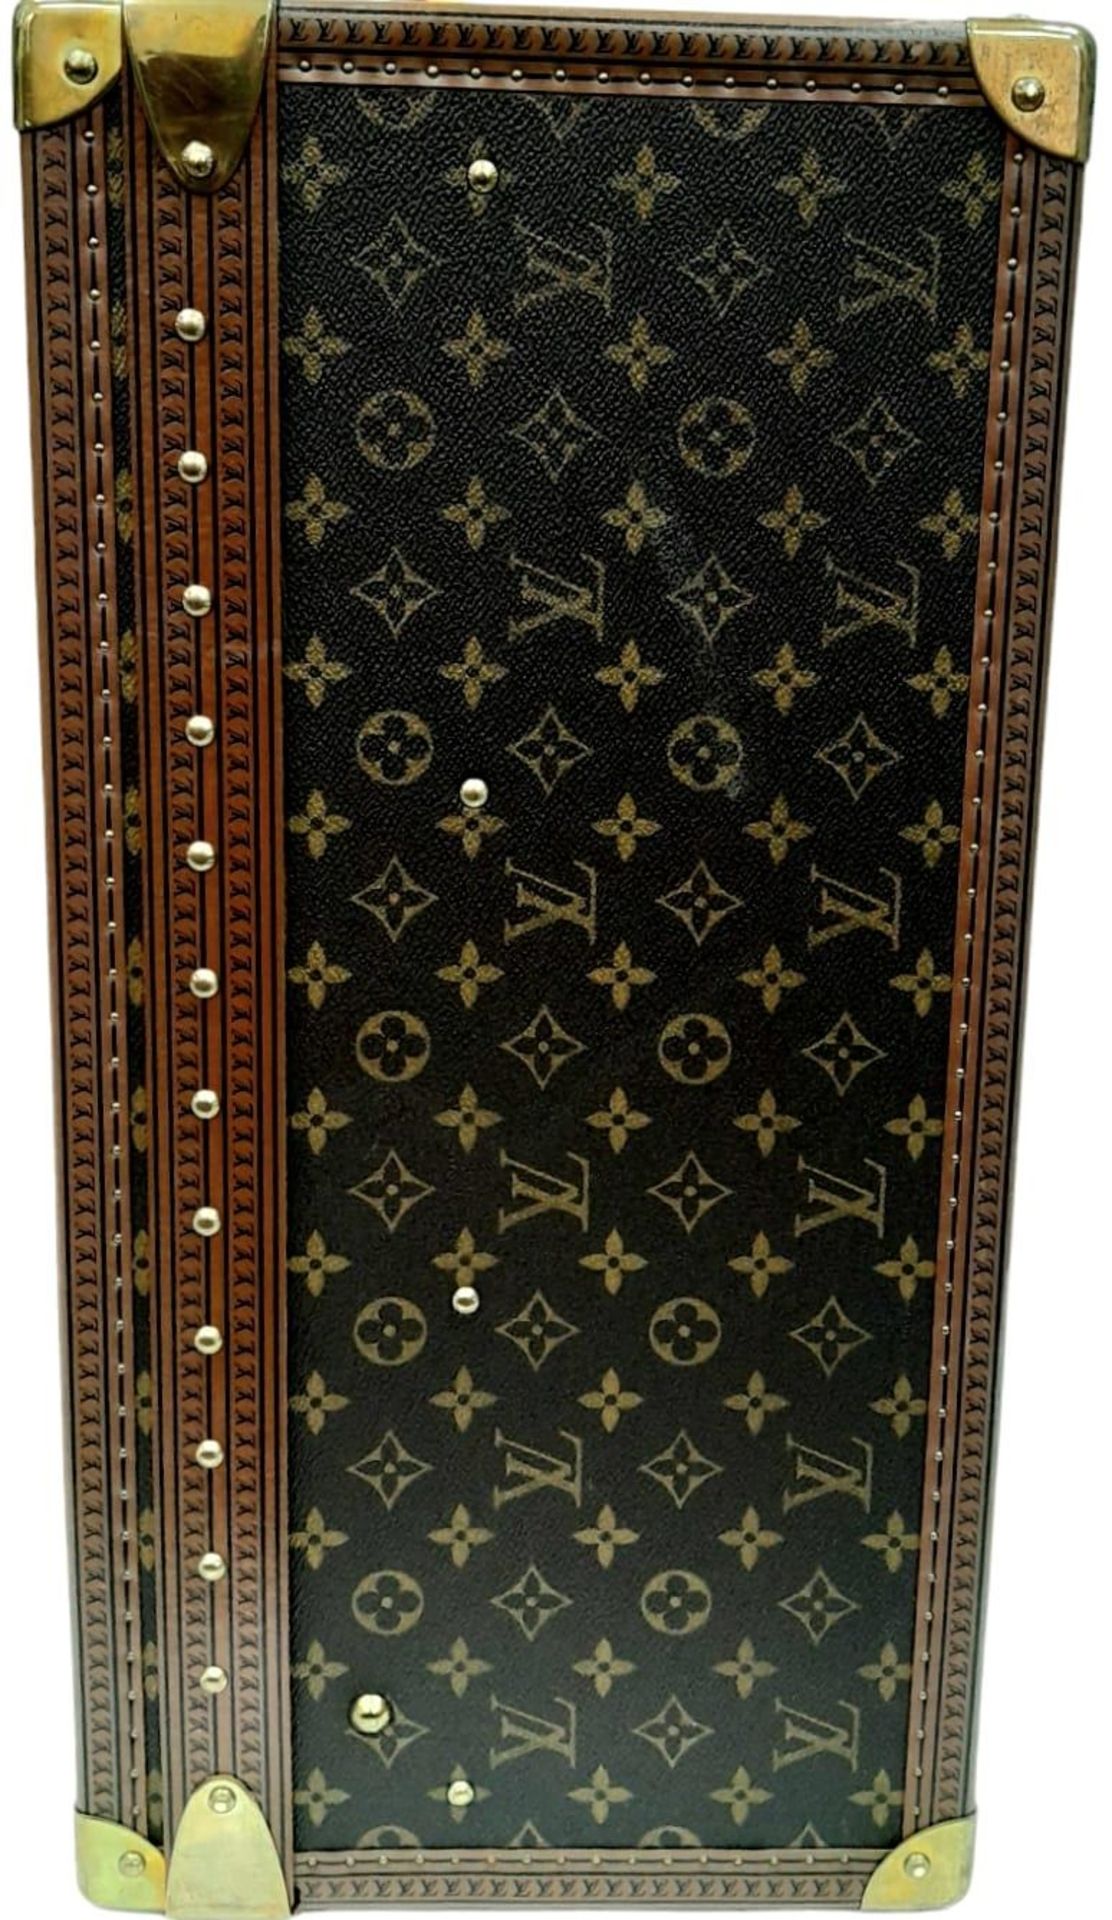 A Louis Vuitton Alzer 80 Monogram Large Sturdy Suitcase/Trunk. Monogram canvas and brown leather - Image 4 of 11